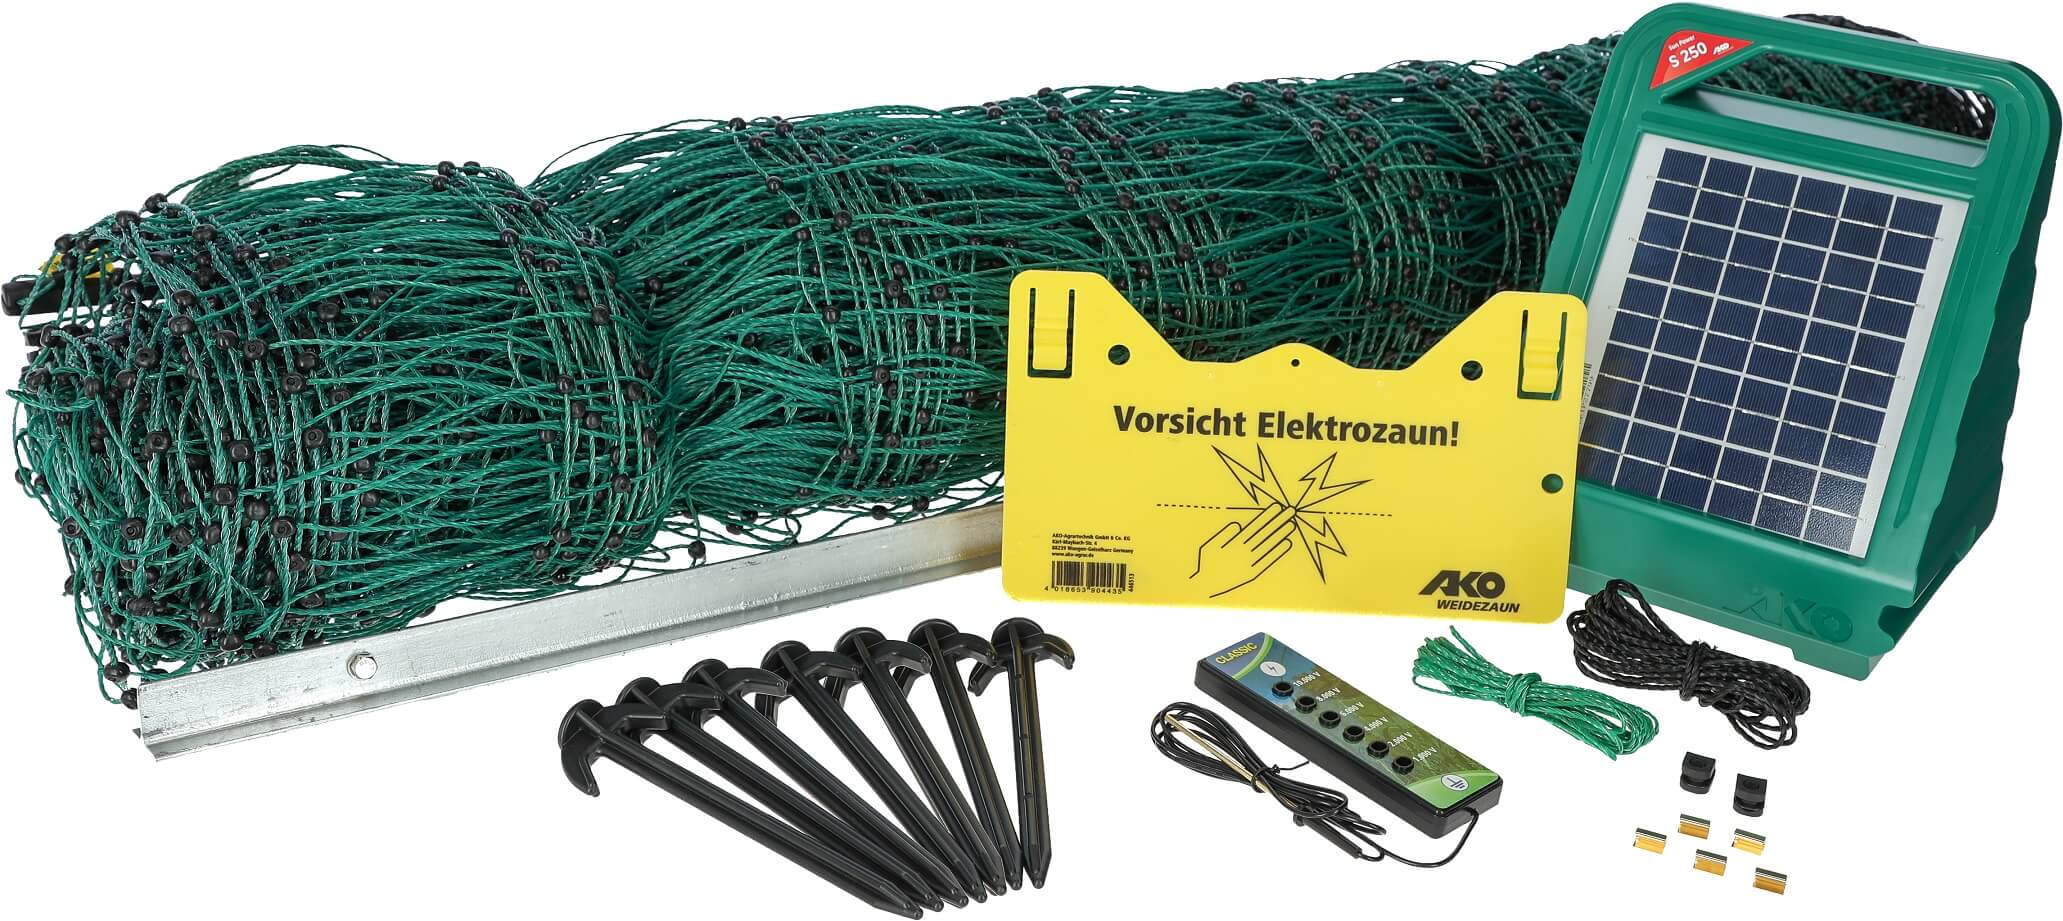 AKO PoultryNet All-In-One Kit Solar